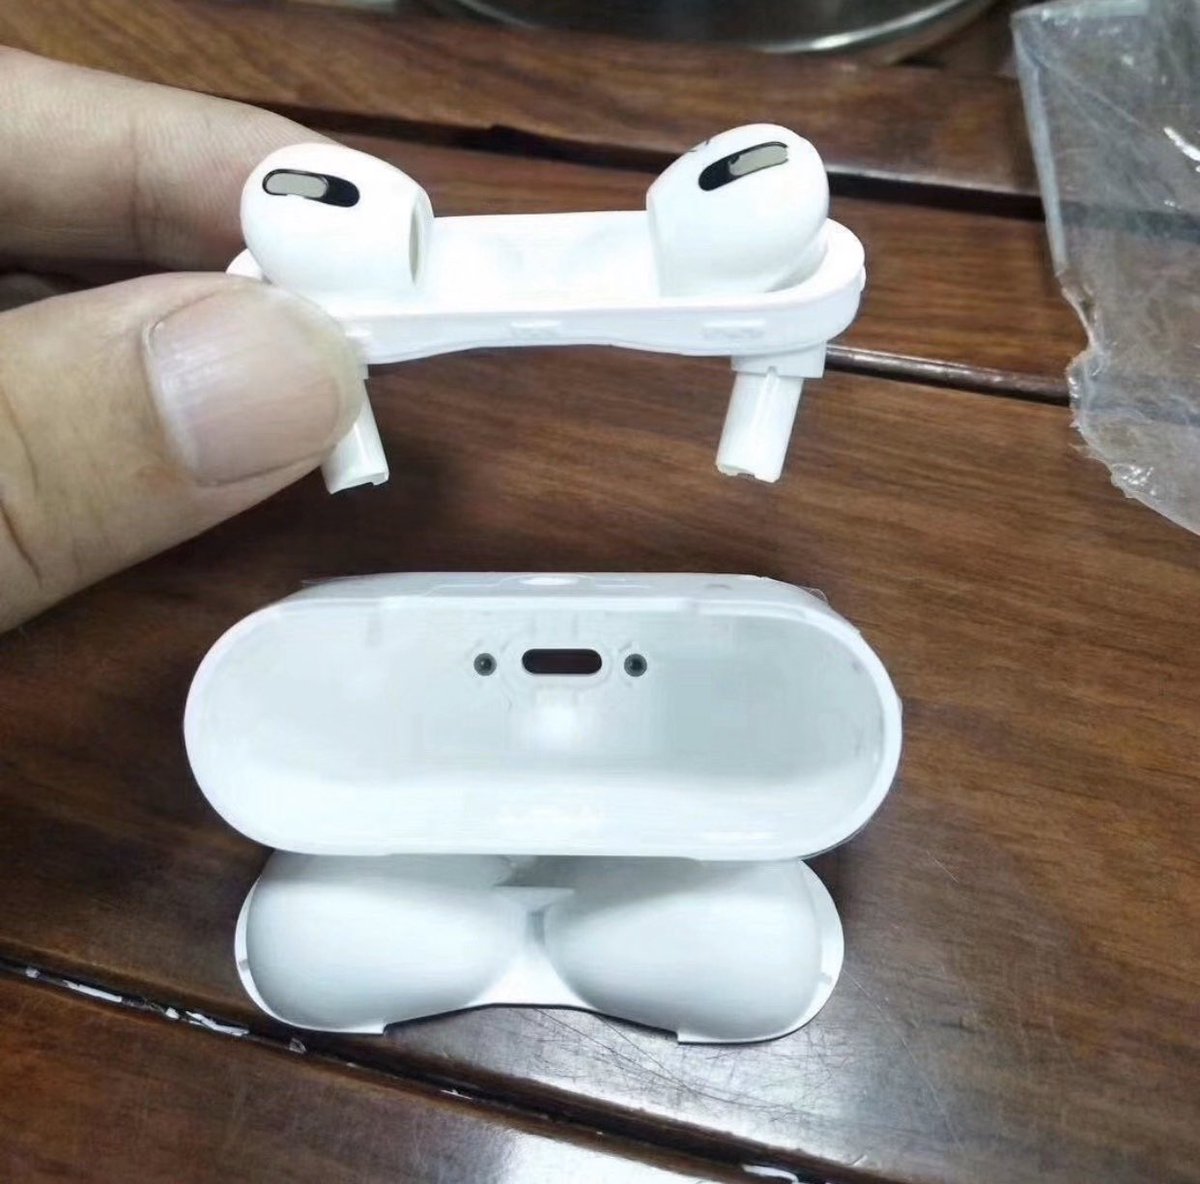 In less than 24 hours of launch, replicas of Apple AirPods Pro surface online - Gizmochina